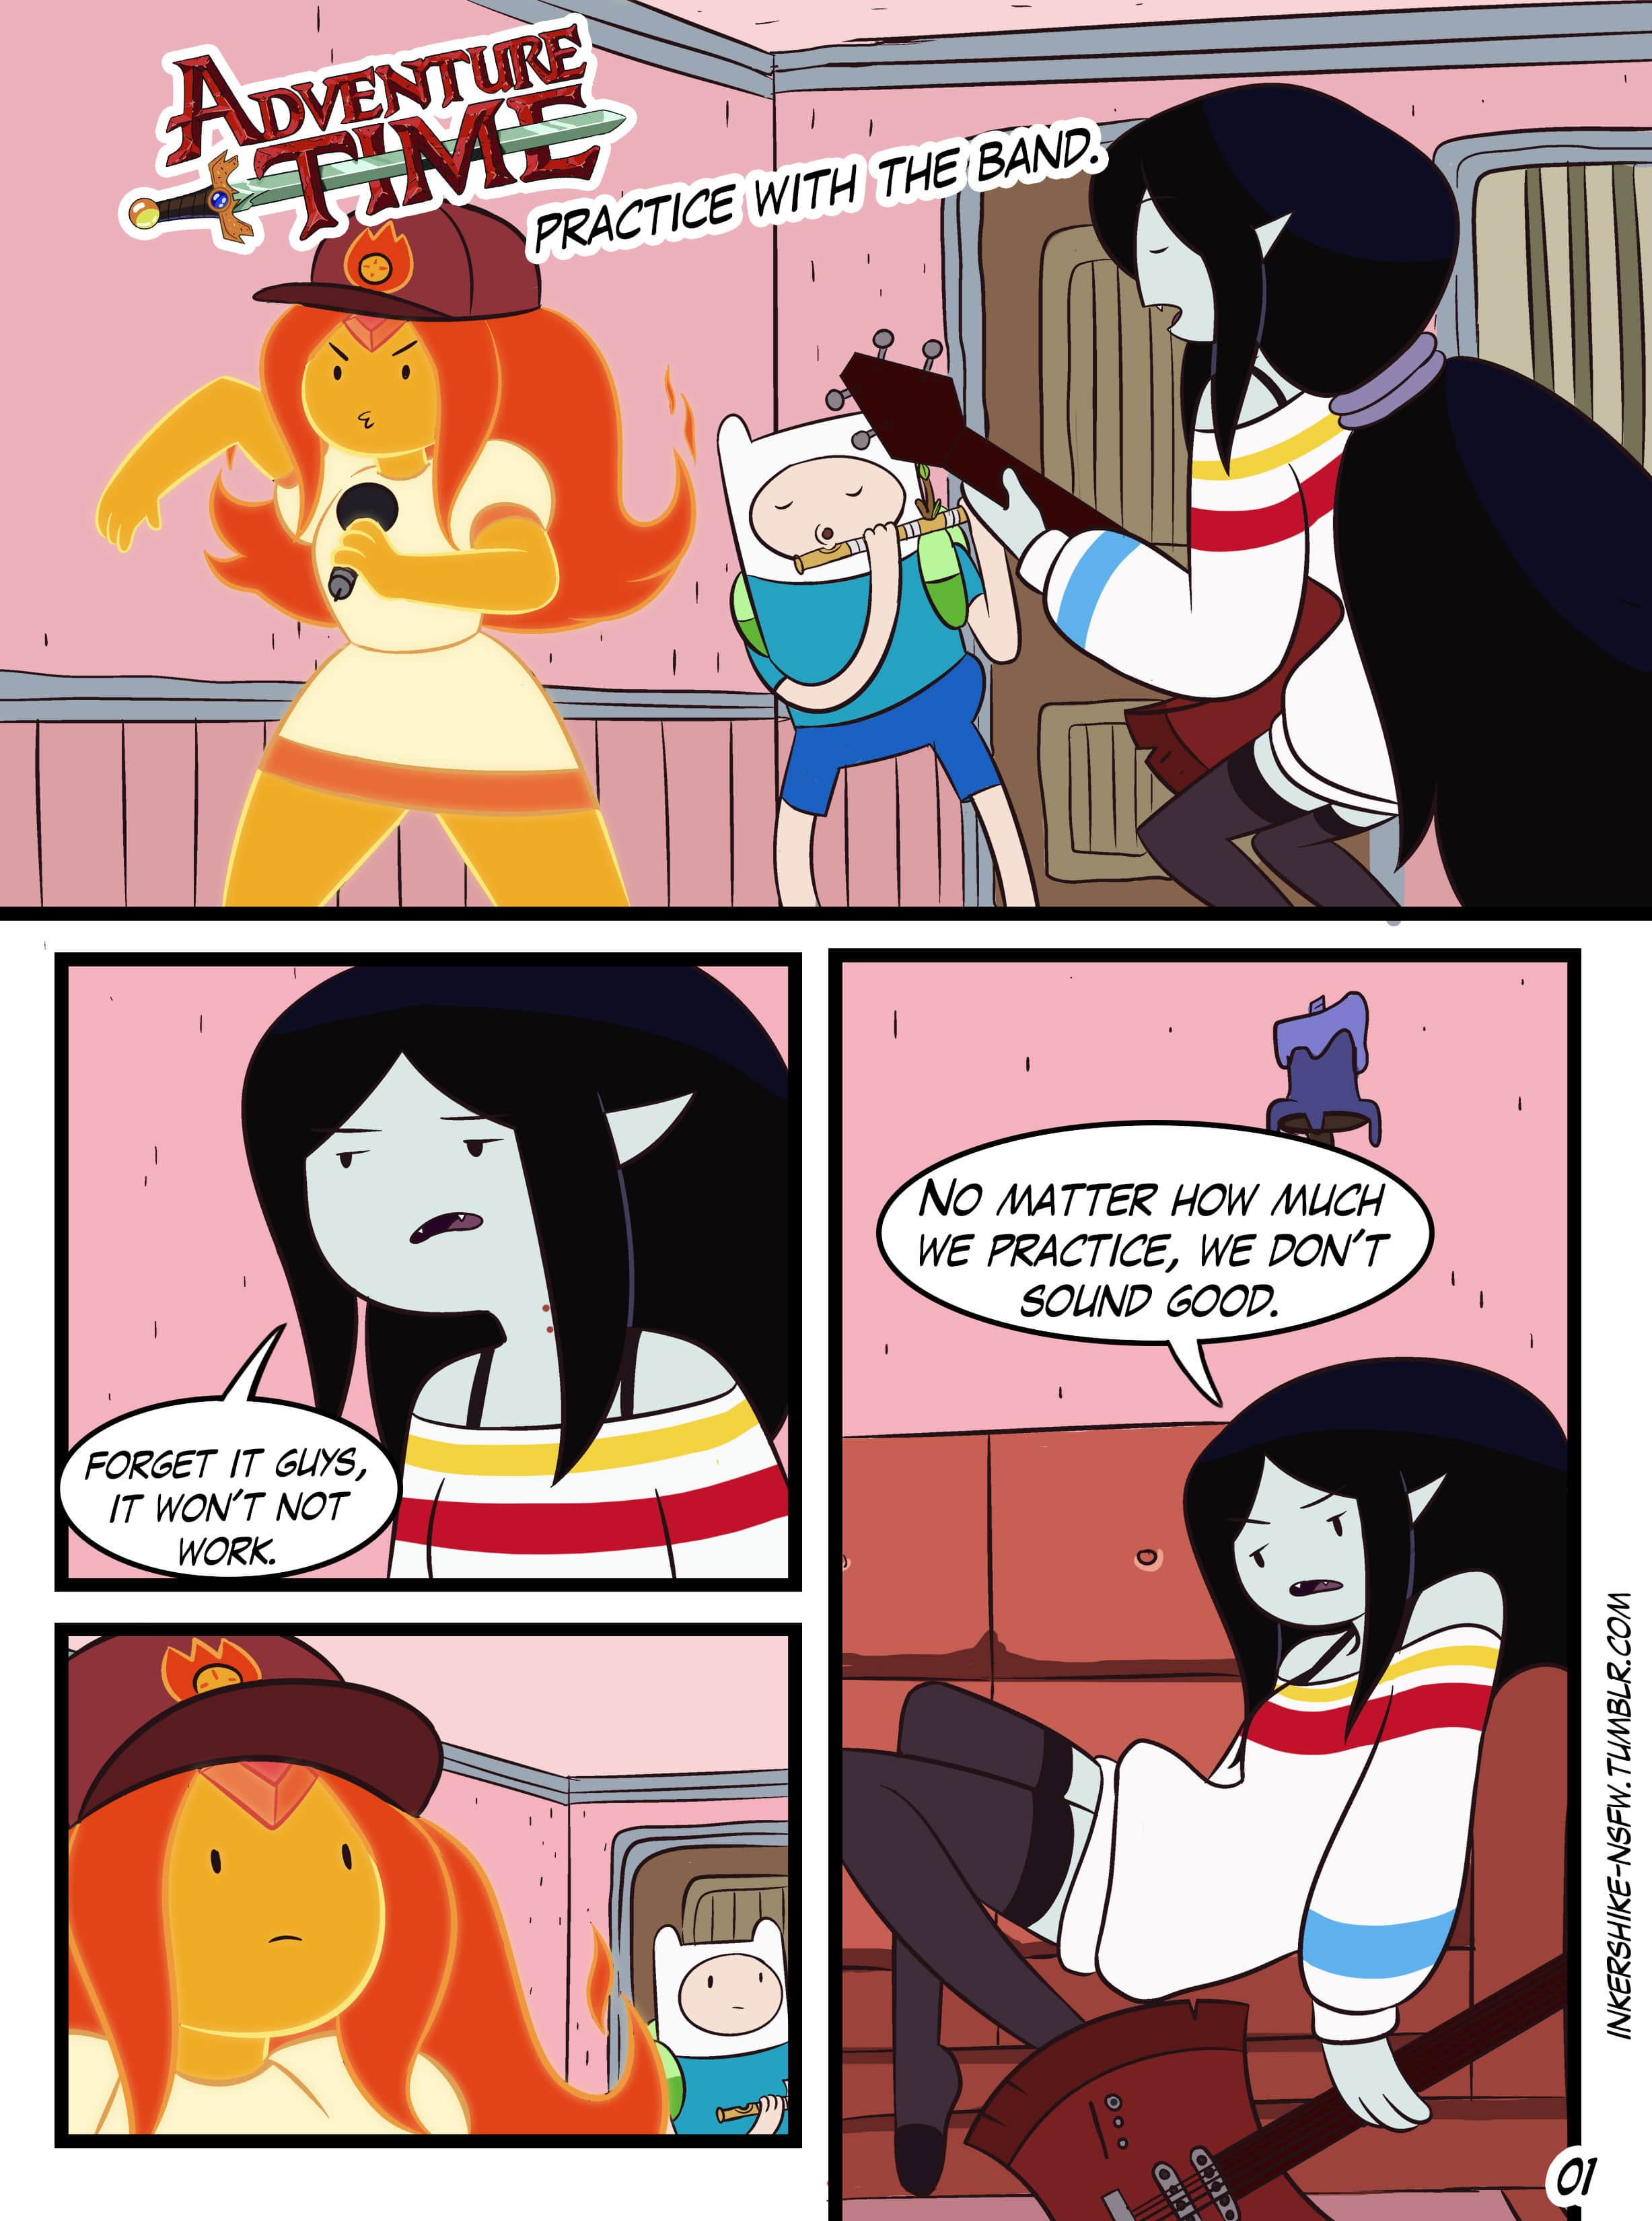 Adventure Time Porn Rule 34 - Adventure time: Practice With The Band Porn Comics by [inkershike] (Adventure  Time) Rule 34 Comics â€“ R34Porn